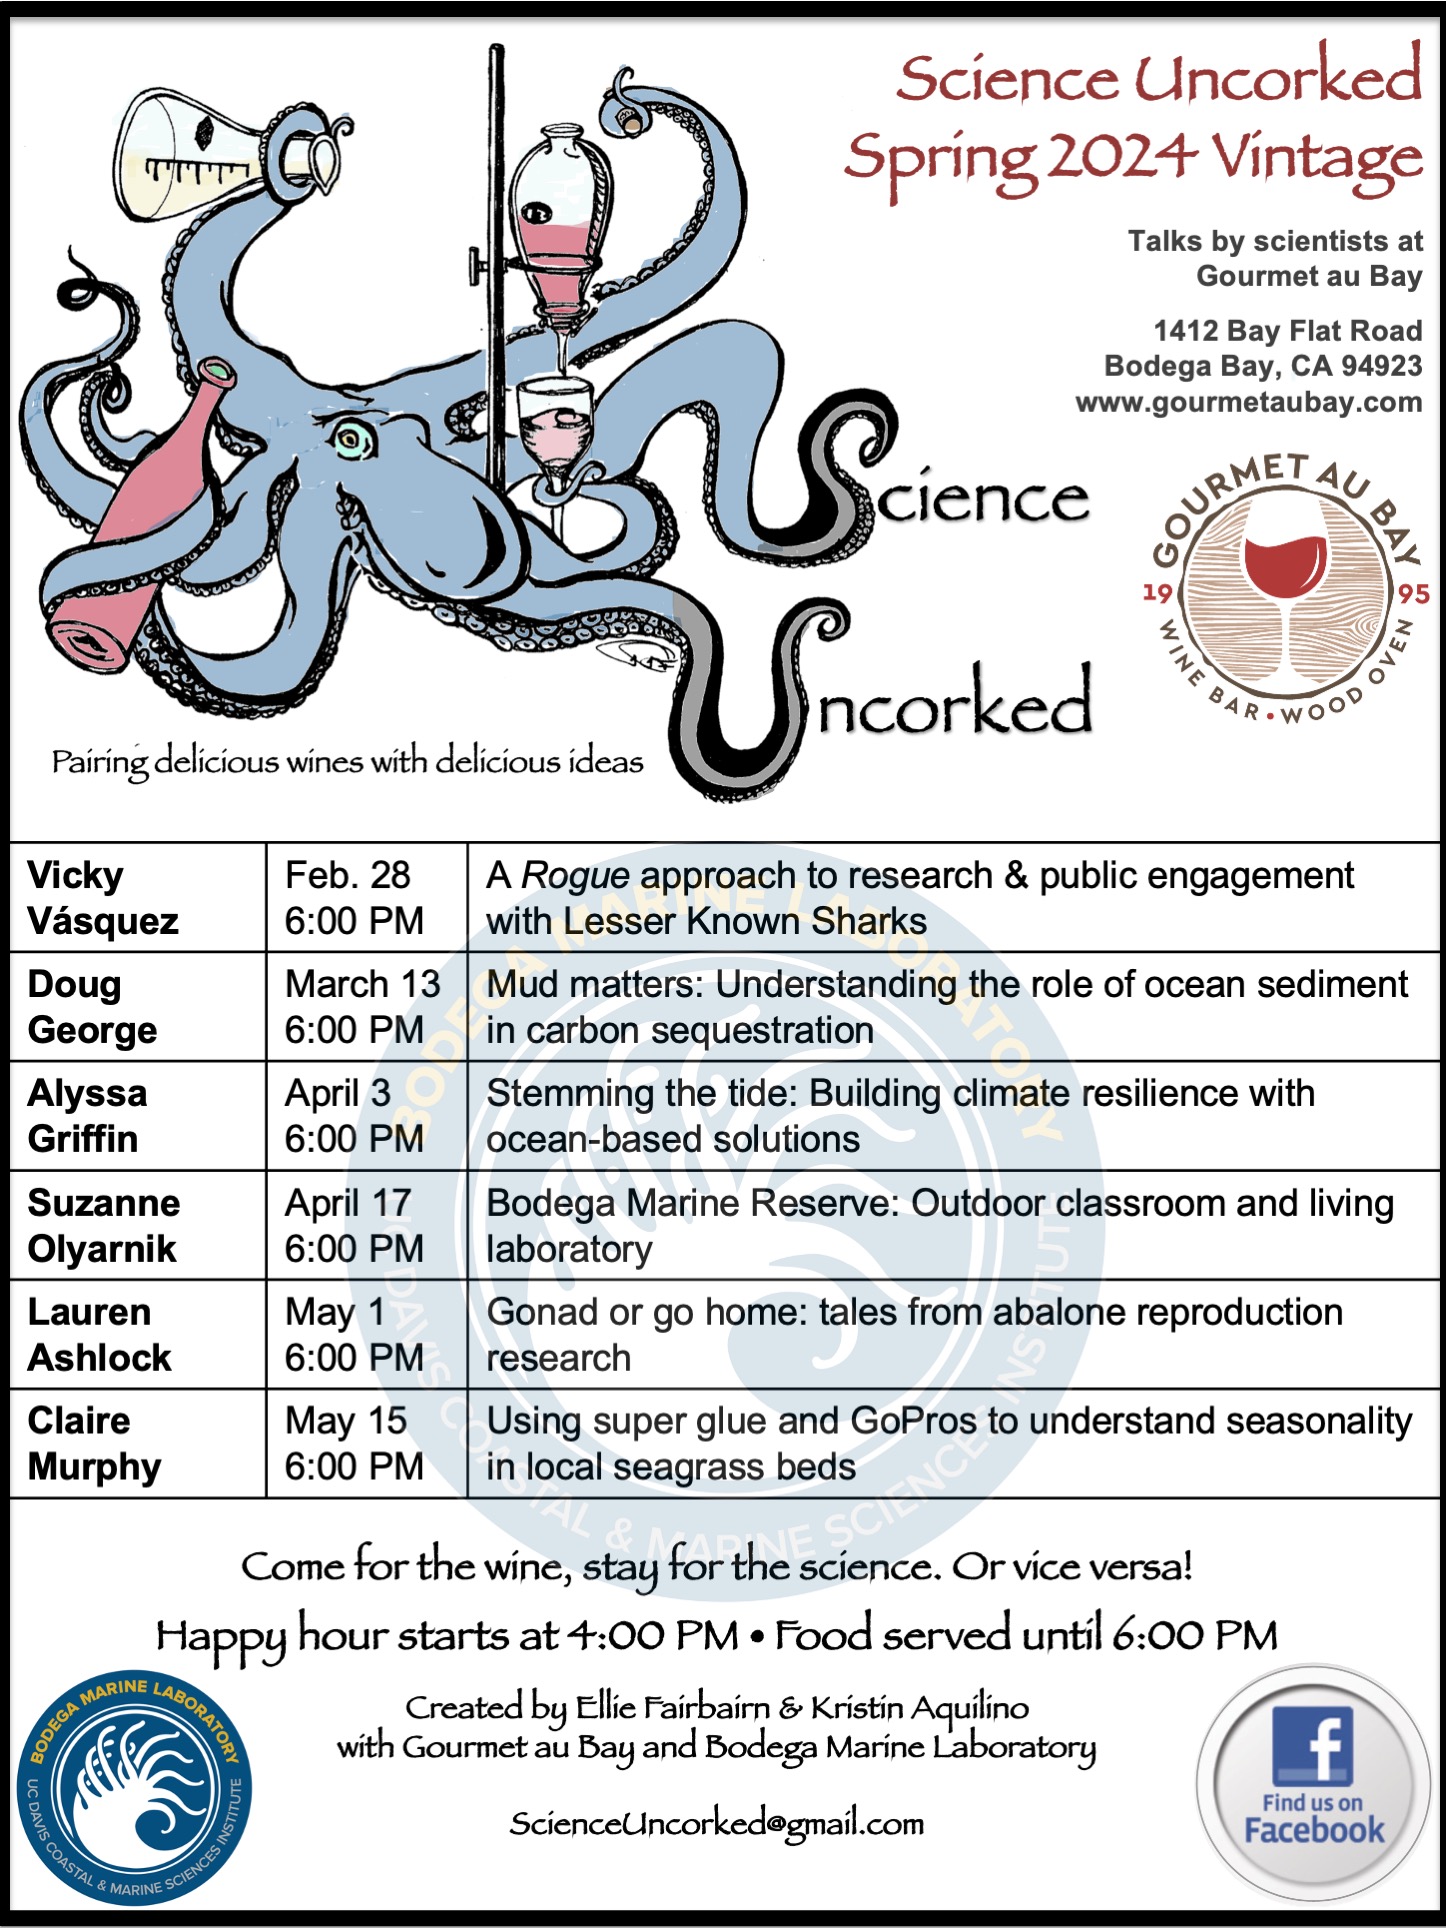 A flyer advertising Science Uncorked at Gourmet au Bay in Bodega Bay. Please see the event listing for full text from the flyer.